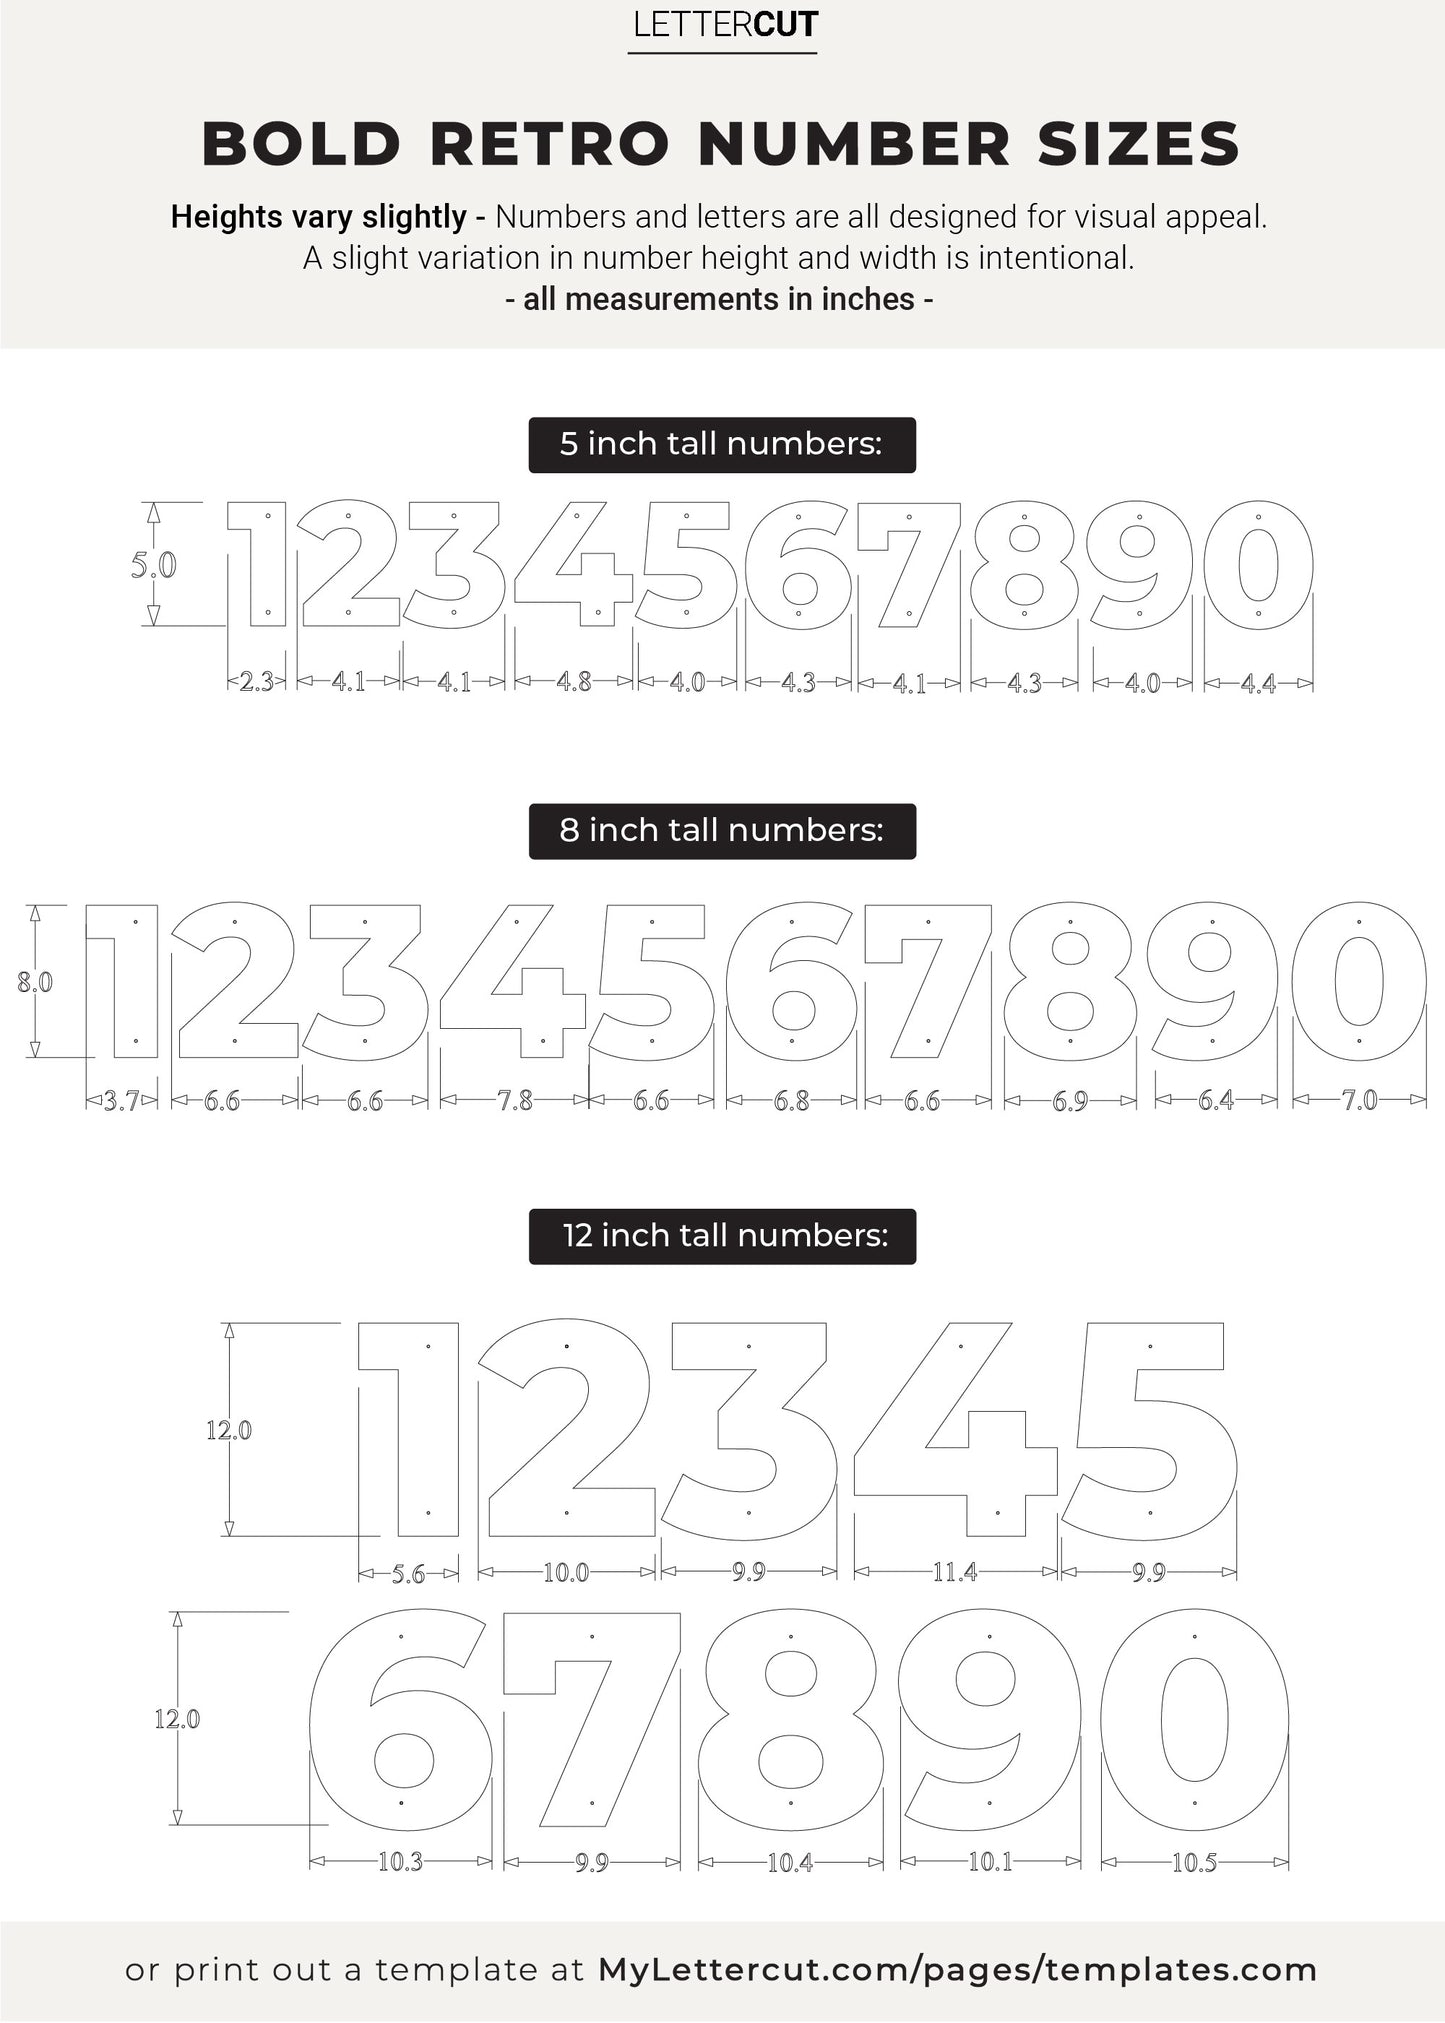 BOLD RETRO number sizes and measurements